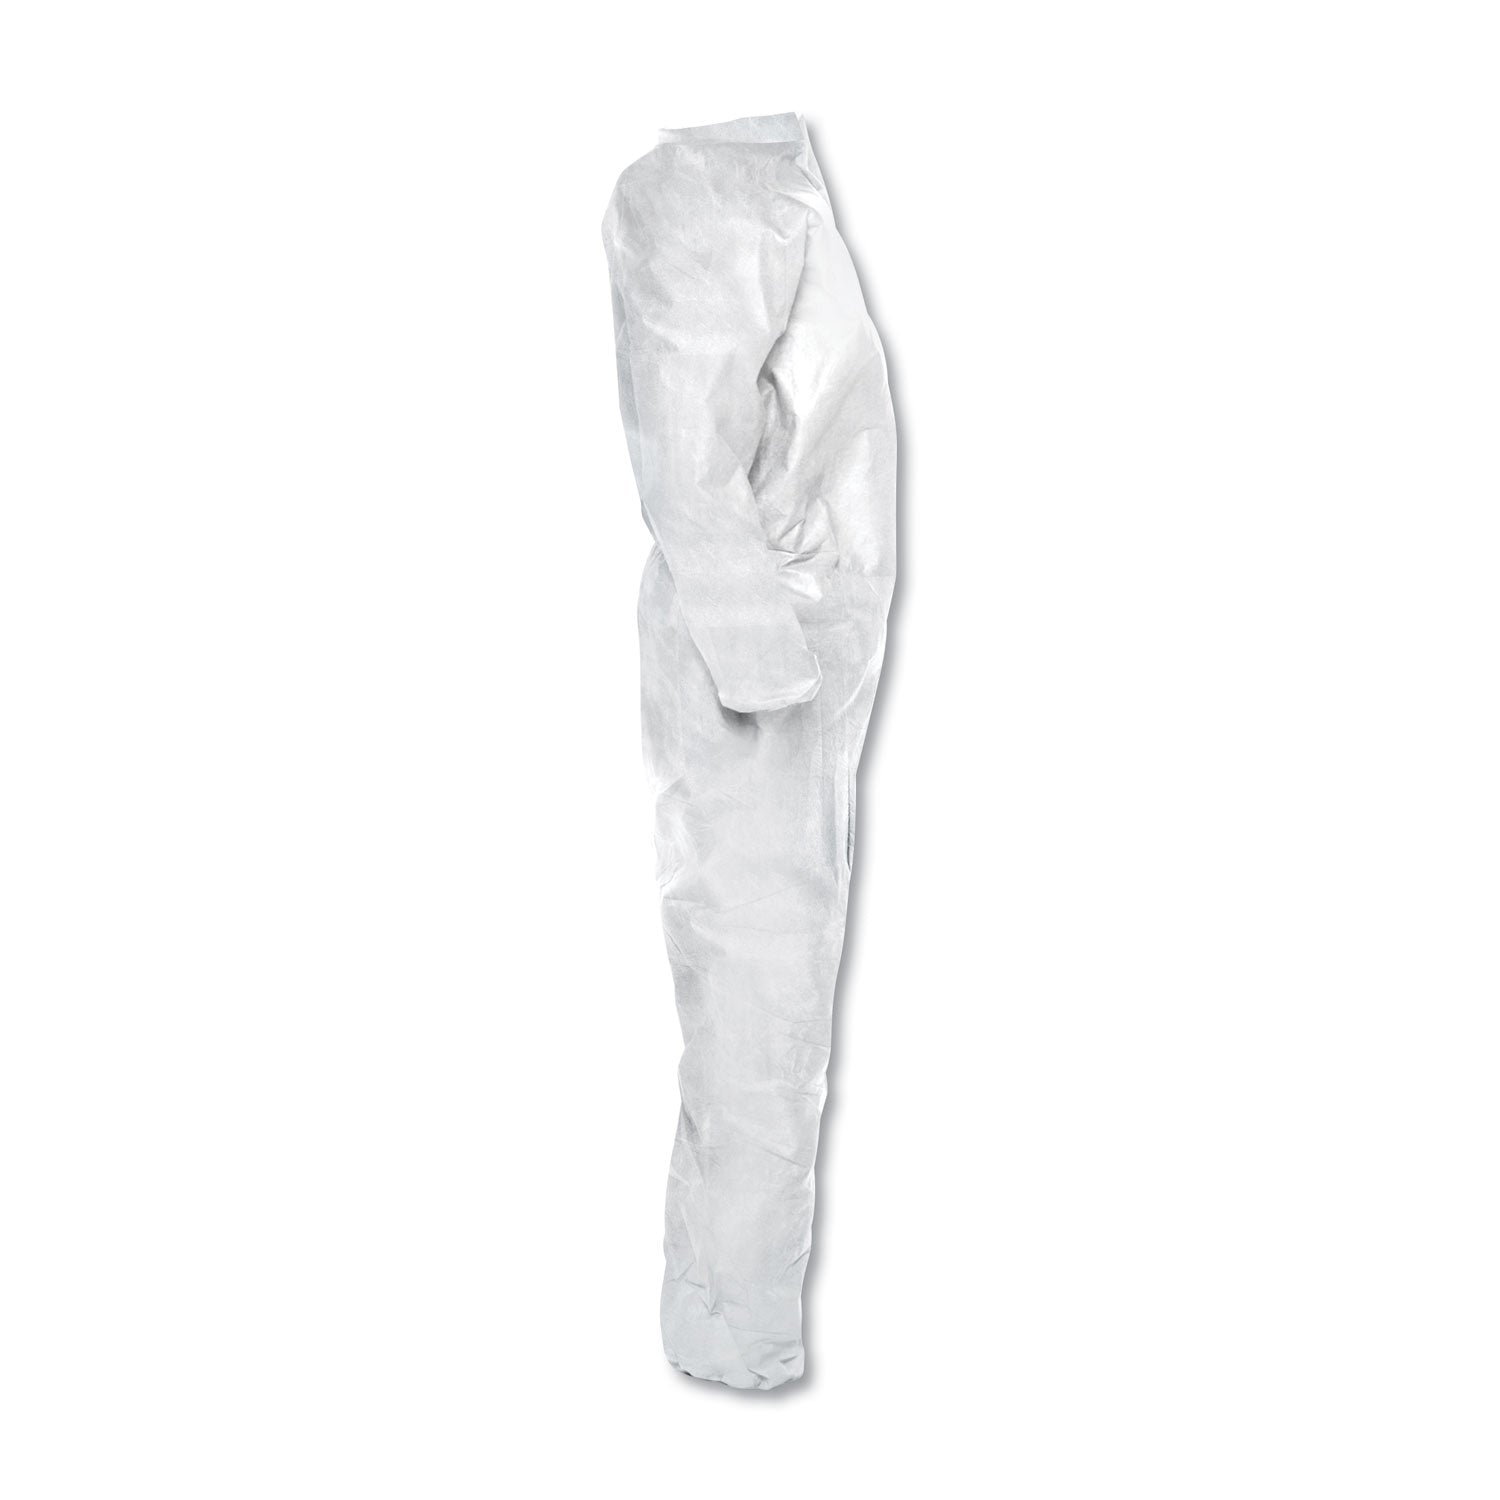 a20-breathable-particle-protection-coveralls-zip-closure-x-large-white_kcc49104 - 5